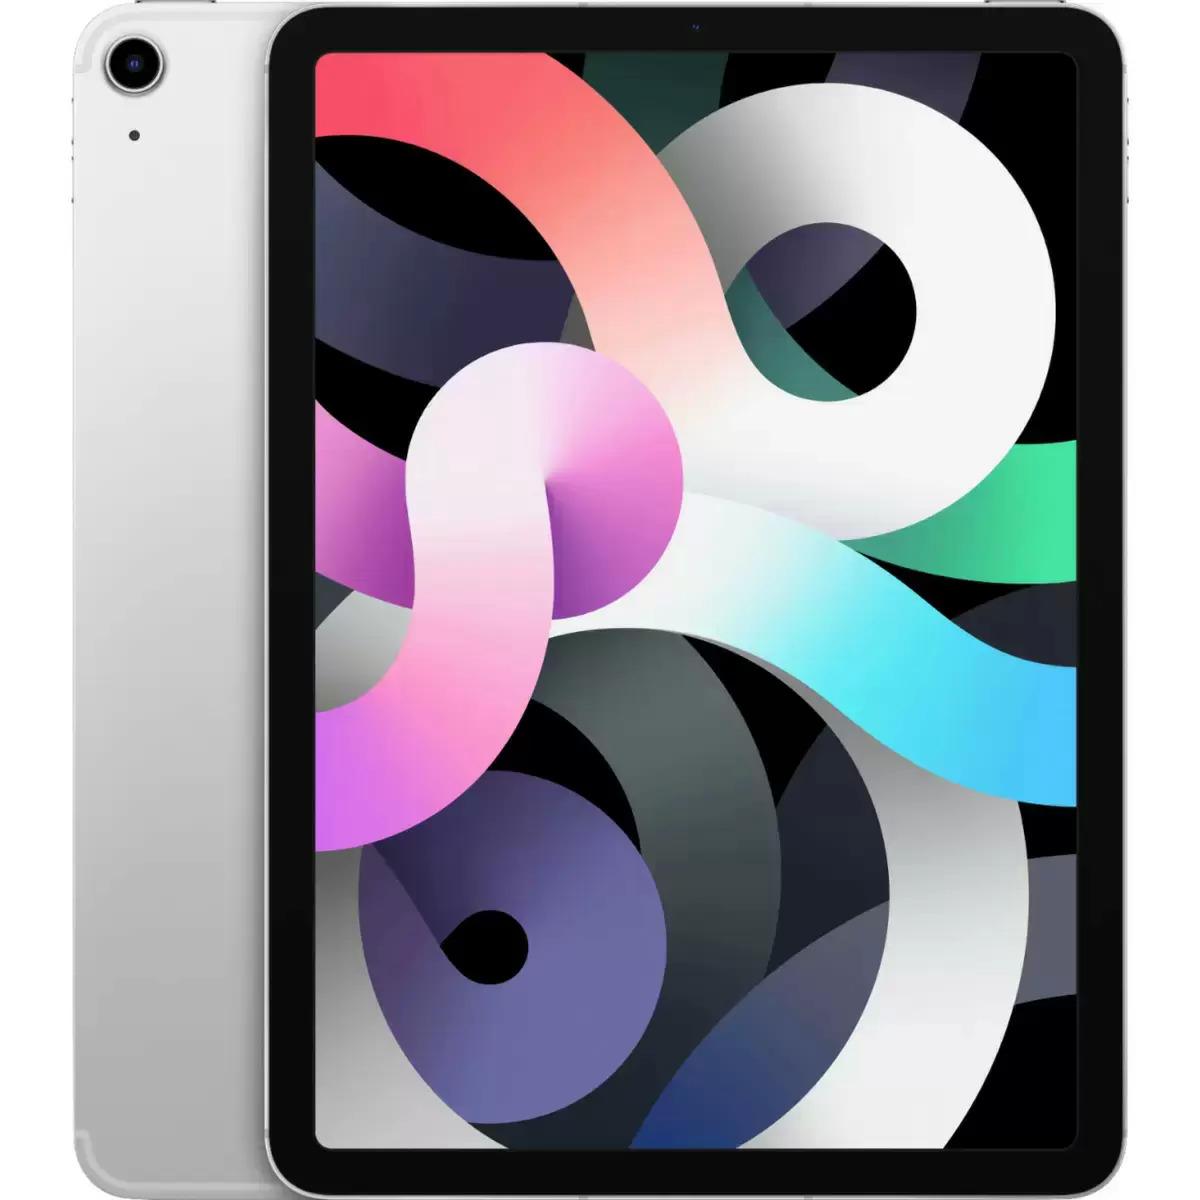 Apple iPad Air 64GB 10.9in Wifi Tablet for Military Veteran Members for $399 Shipped